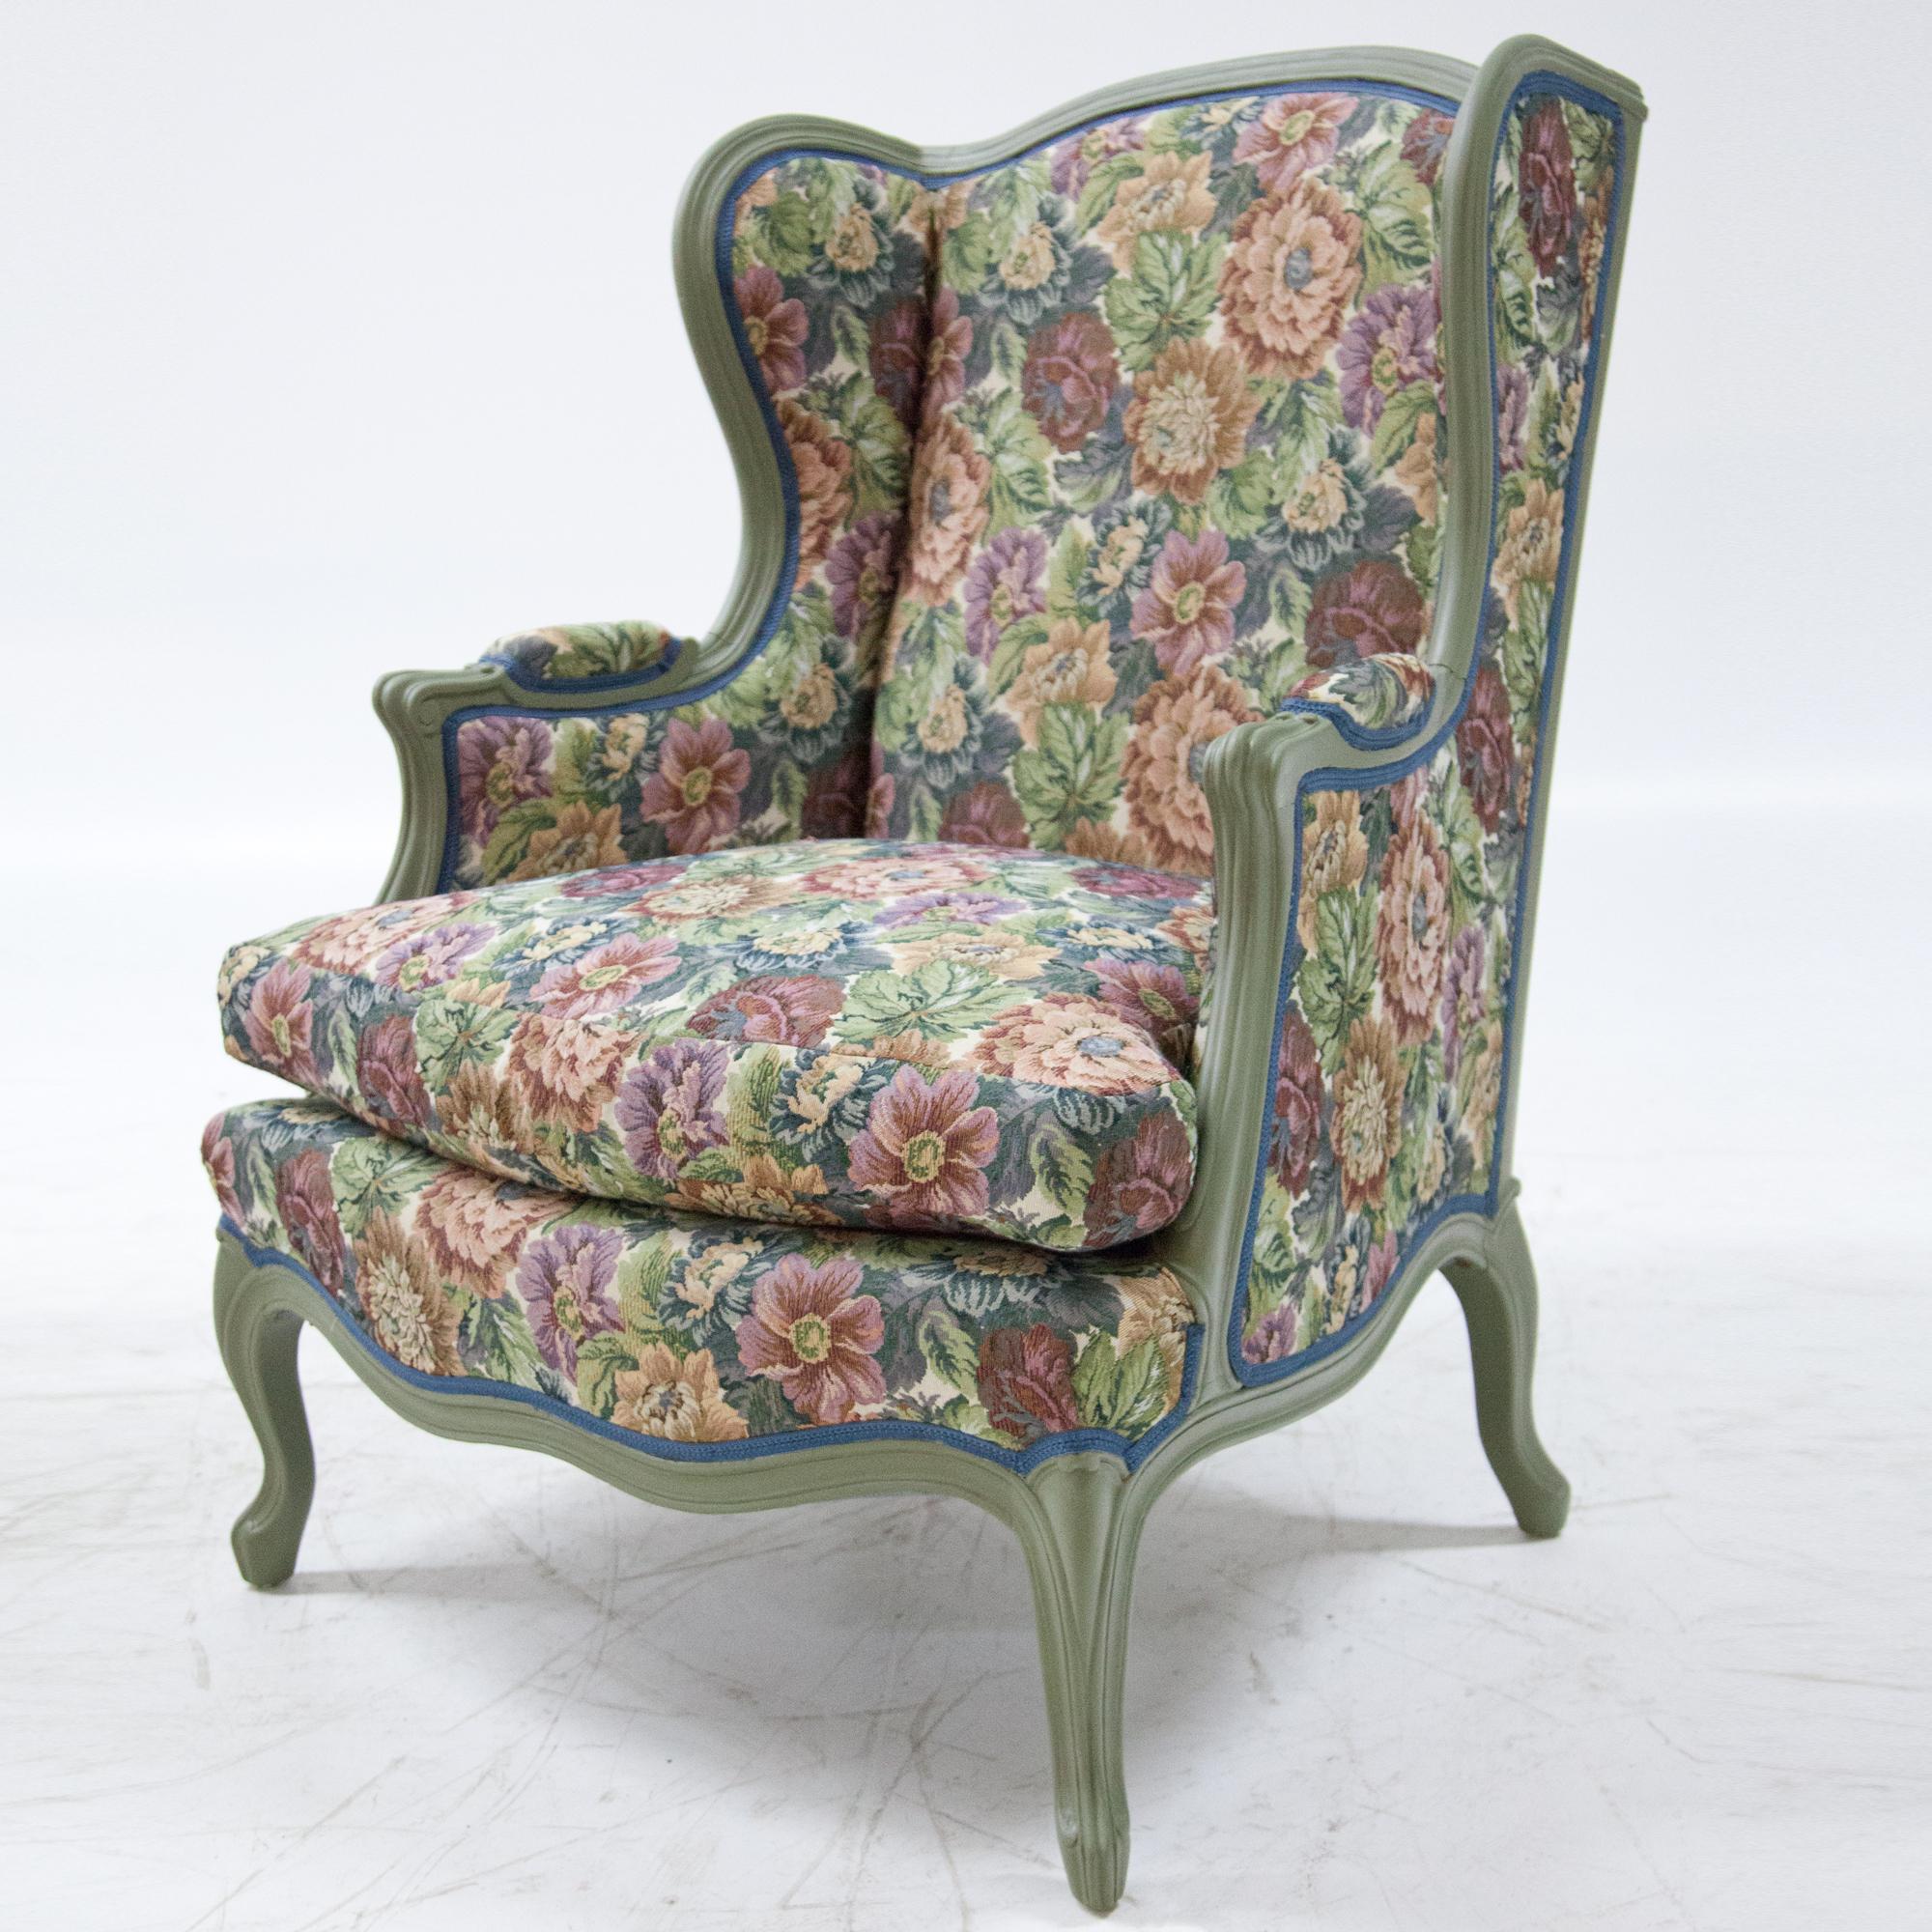 Four winged armchairs on s-legs with a double curved front rail and high backrests. The chairs were recently covered with a floral fabric and painted in mint green.